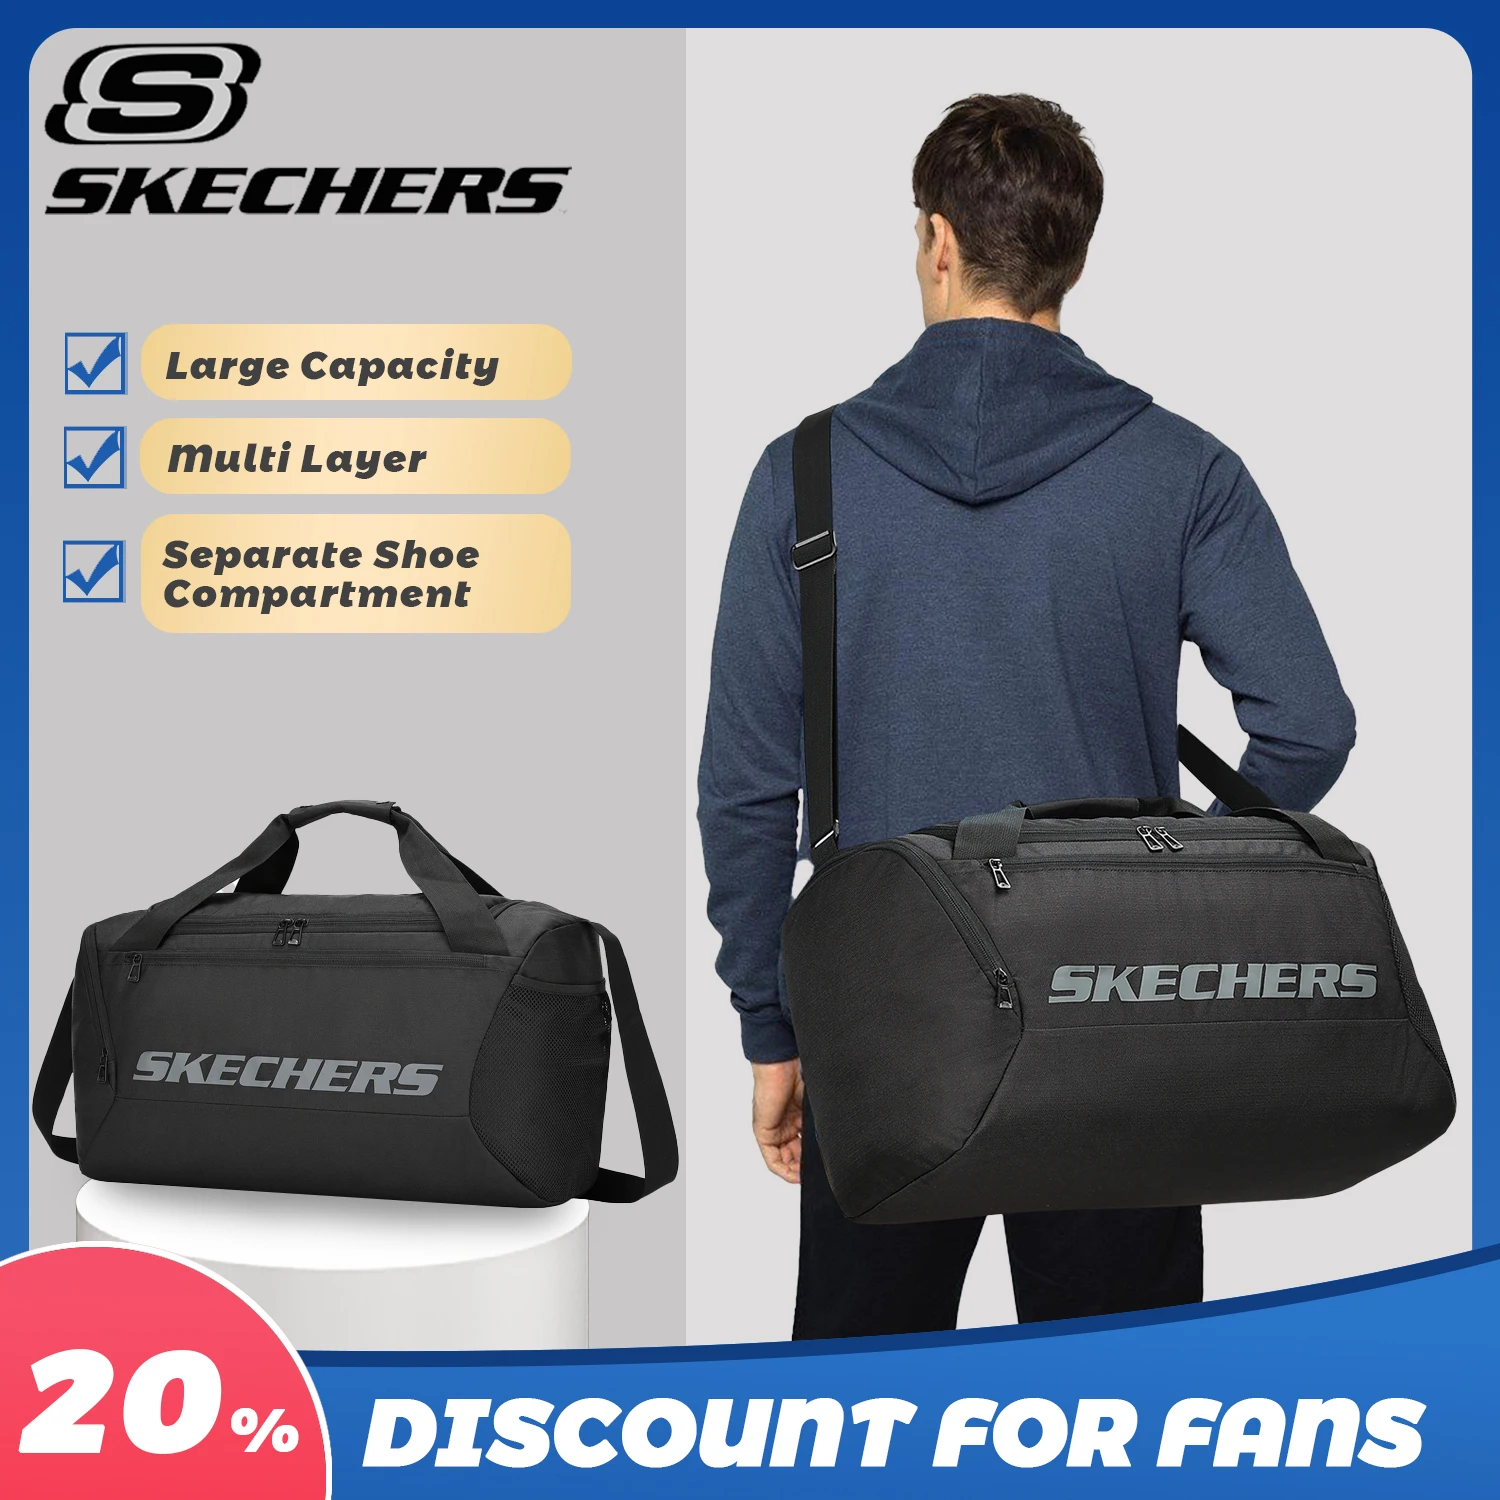 SKECHERS Travel Duffel Bag Camping Bag with Shoes Compartment Gym Sports Handbag Weekender Bag Luggage Package for Men & Women